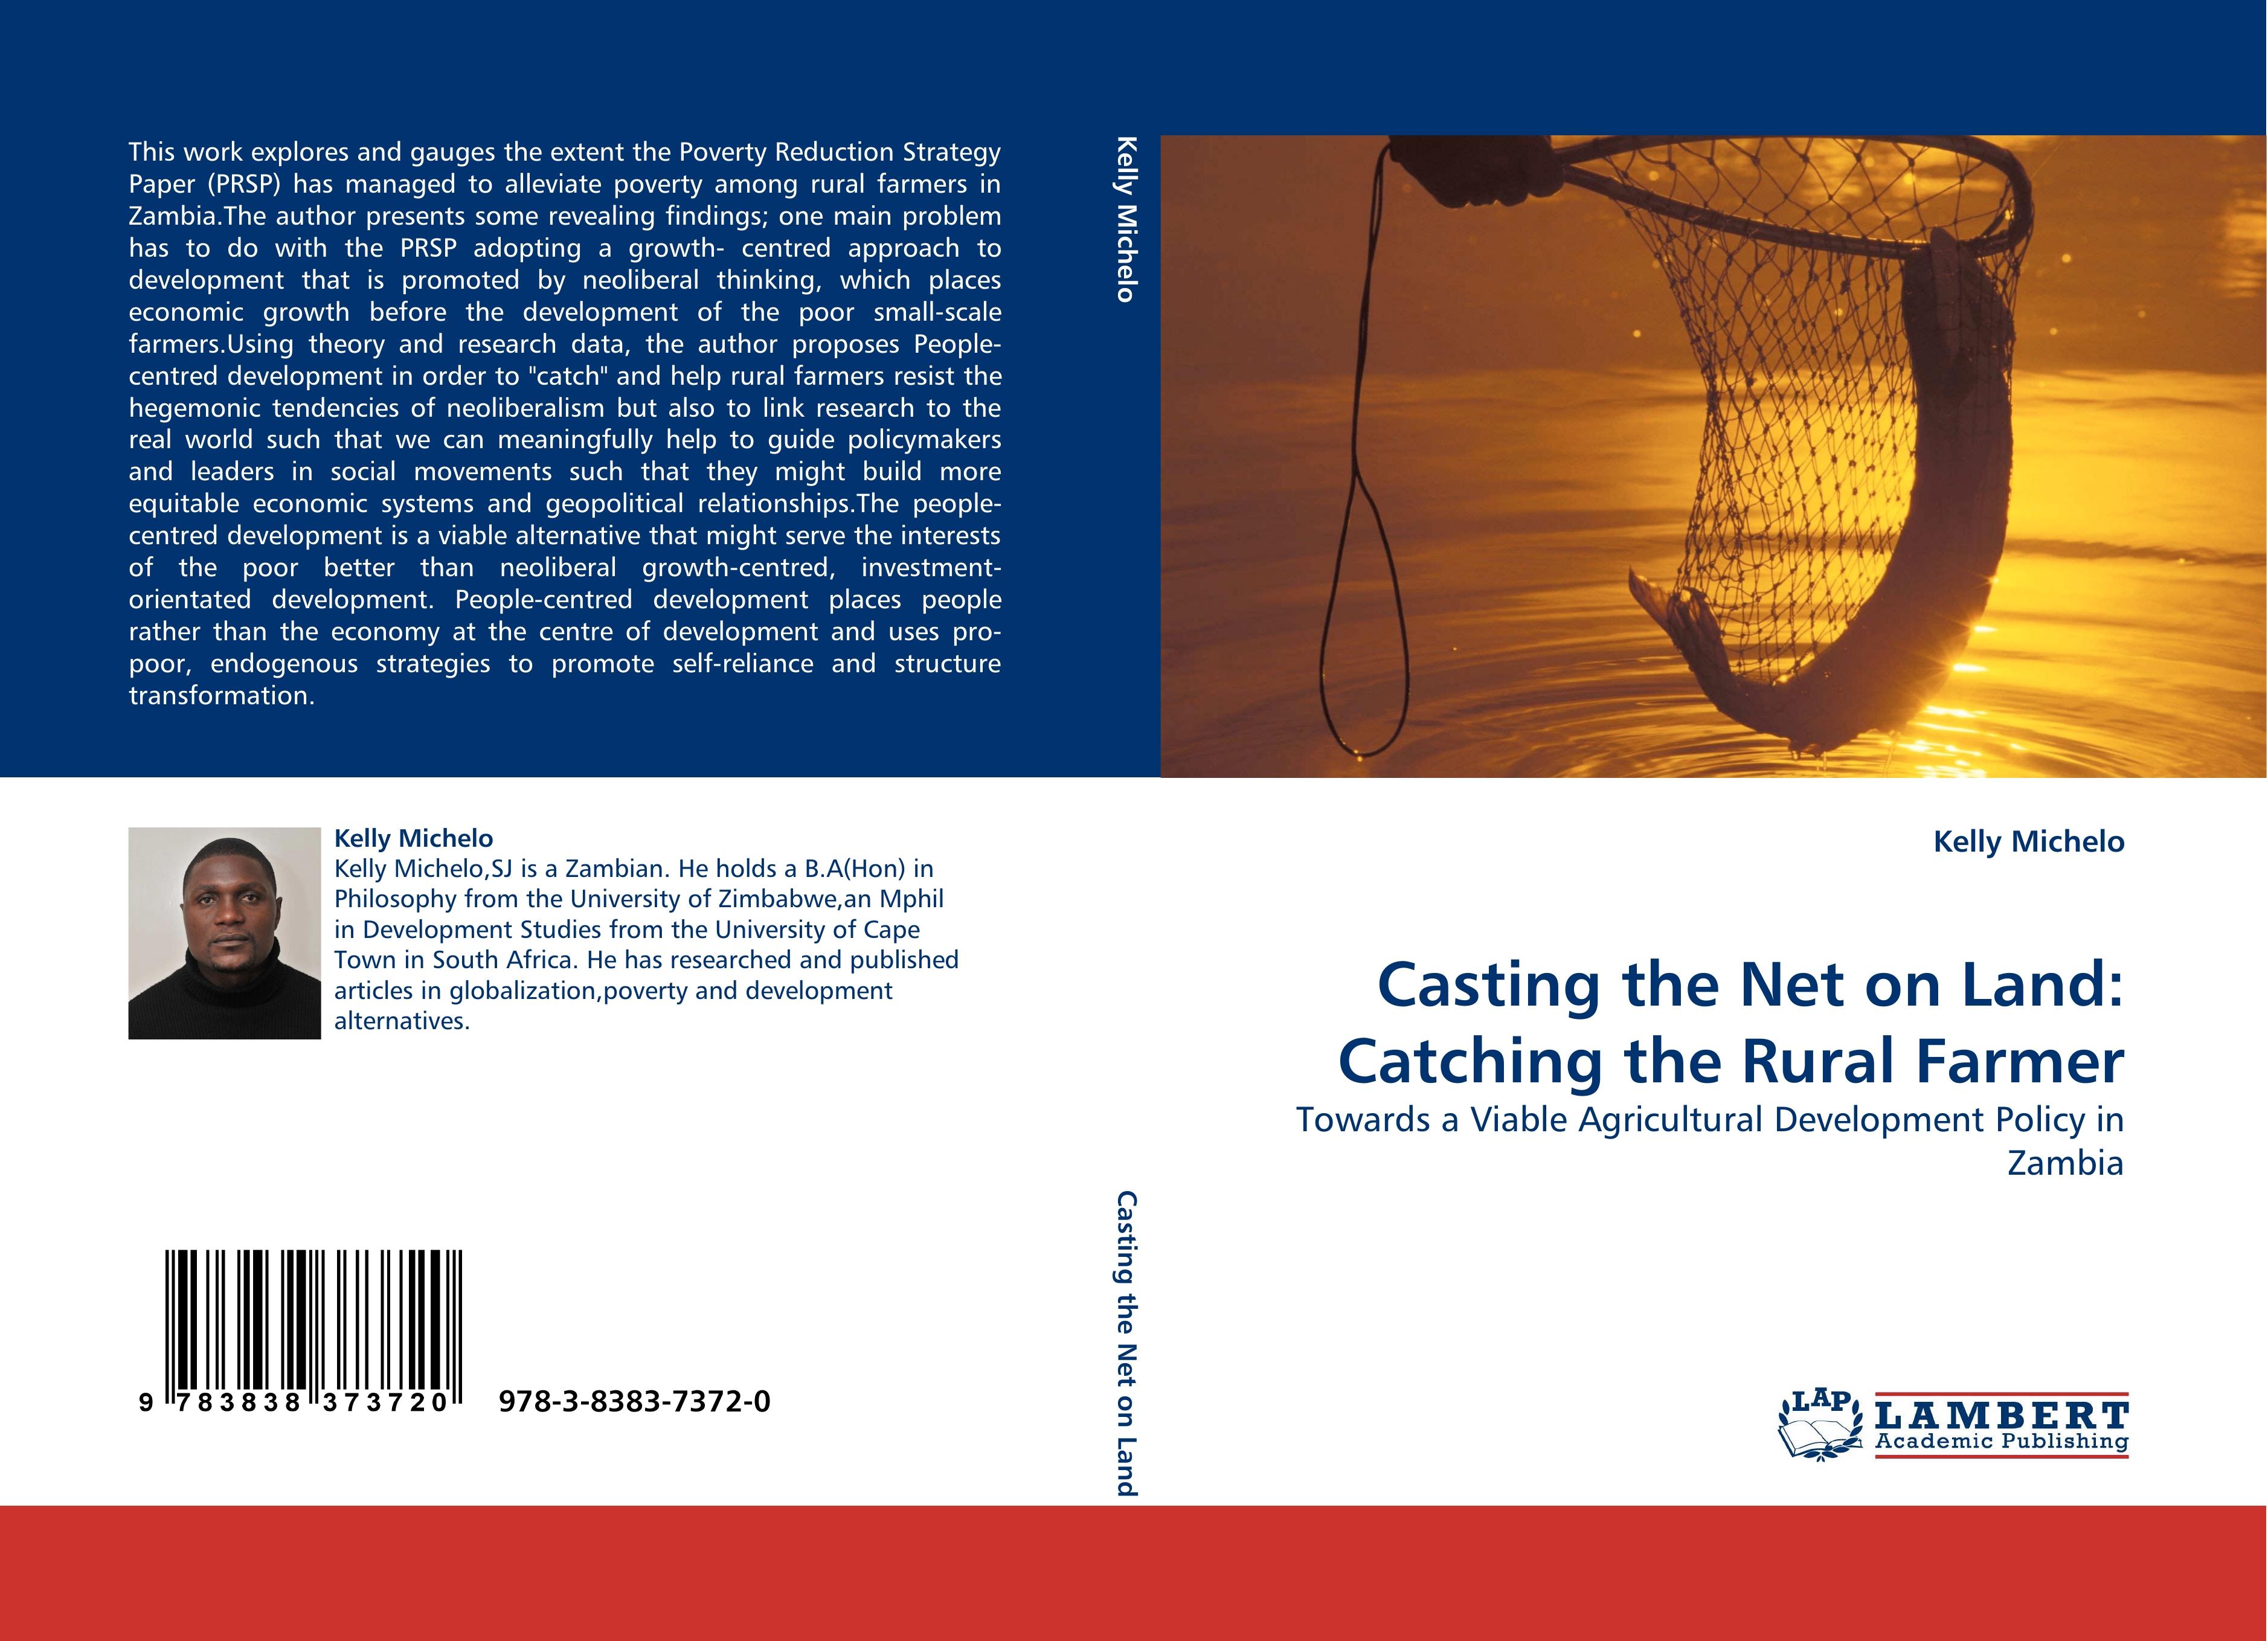 Casting the Net on Land: Catching the Rural Farmer | Towards a Viable Agricultural Development Policy in Zambia | Kelly Michelo | Taschenbuch | Paperback | 128 S. | Englisch | 2010 | EAN 9783838373720 - Michelo, Kelly